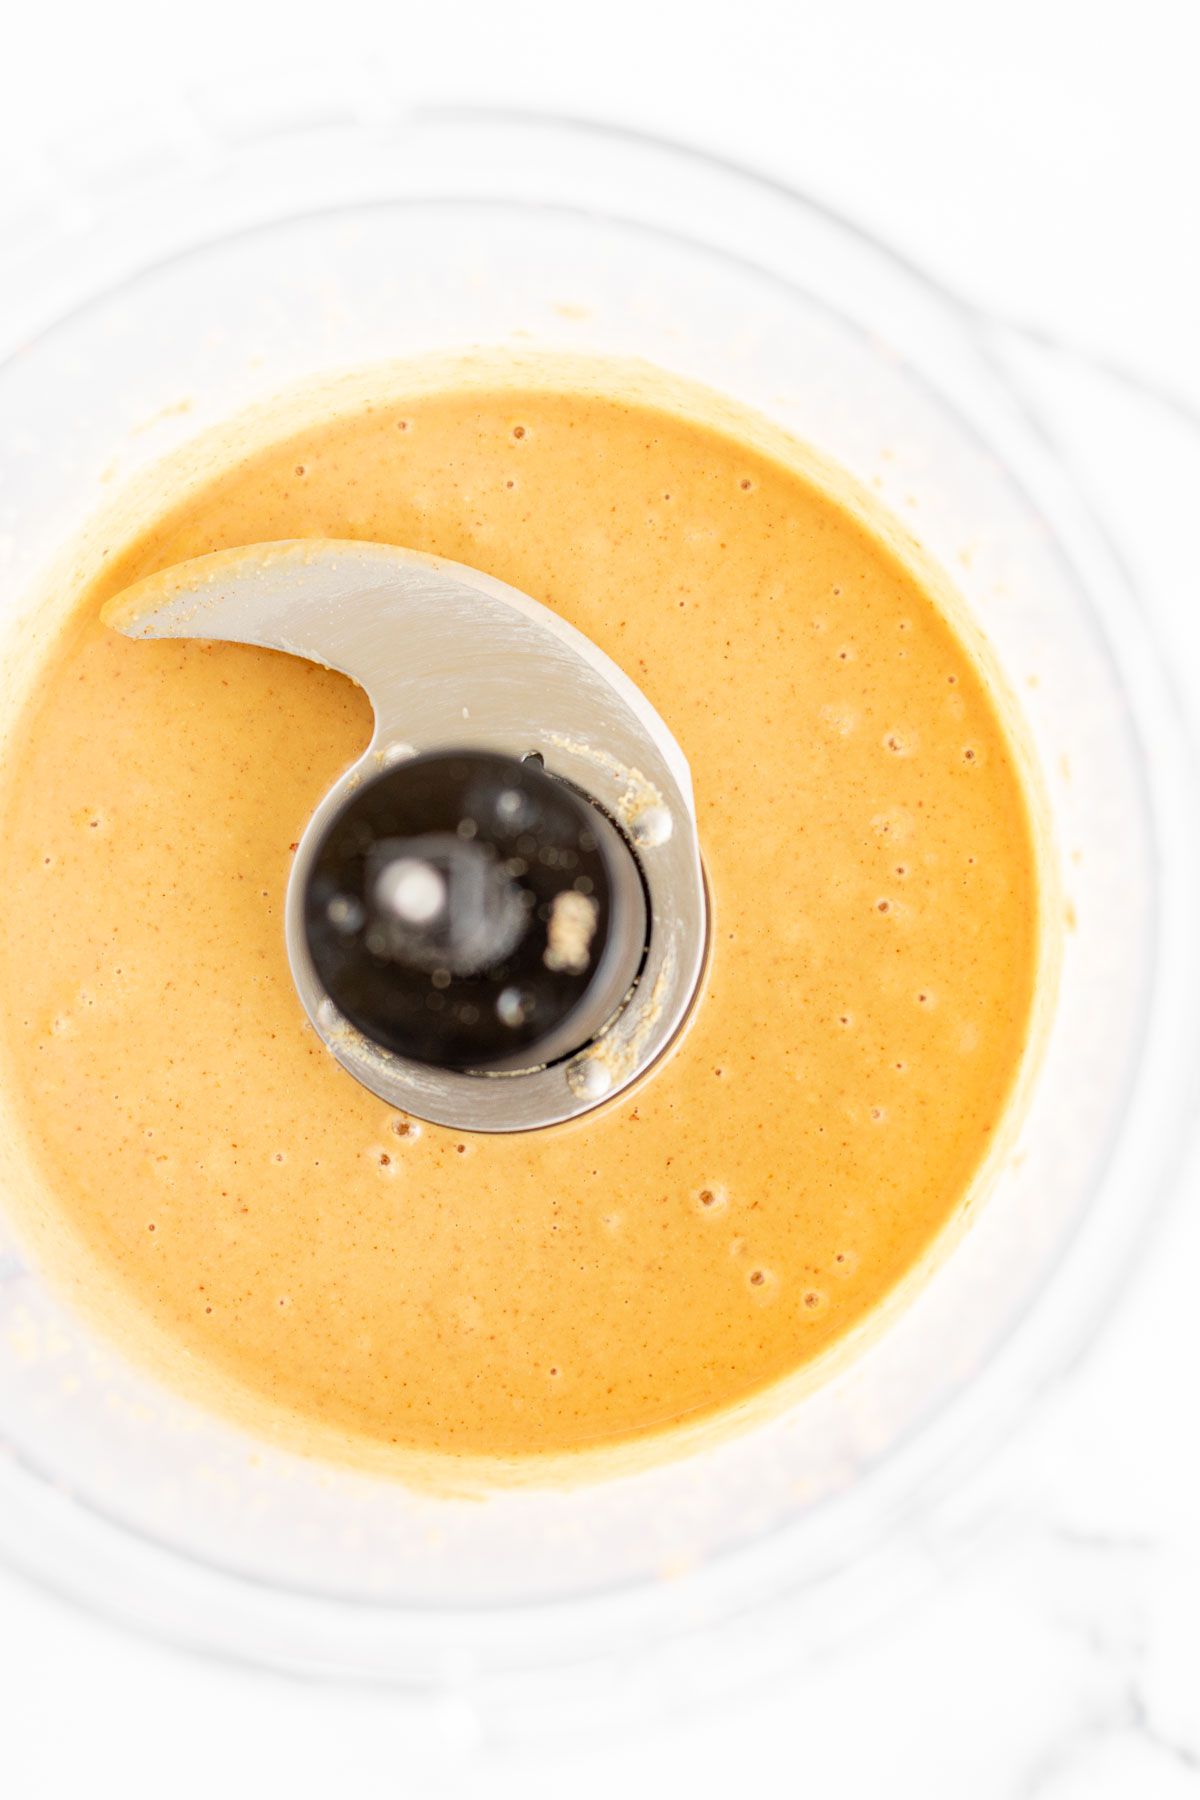 Image features homemade peanut butter in a food processor as part of a tutorial for how to make peanut butter.